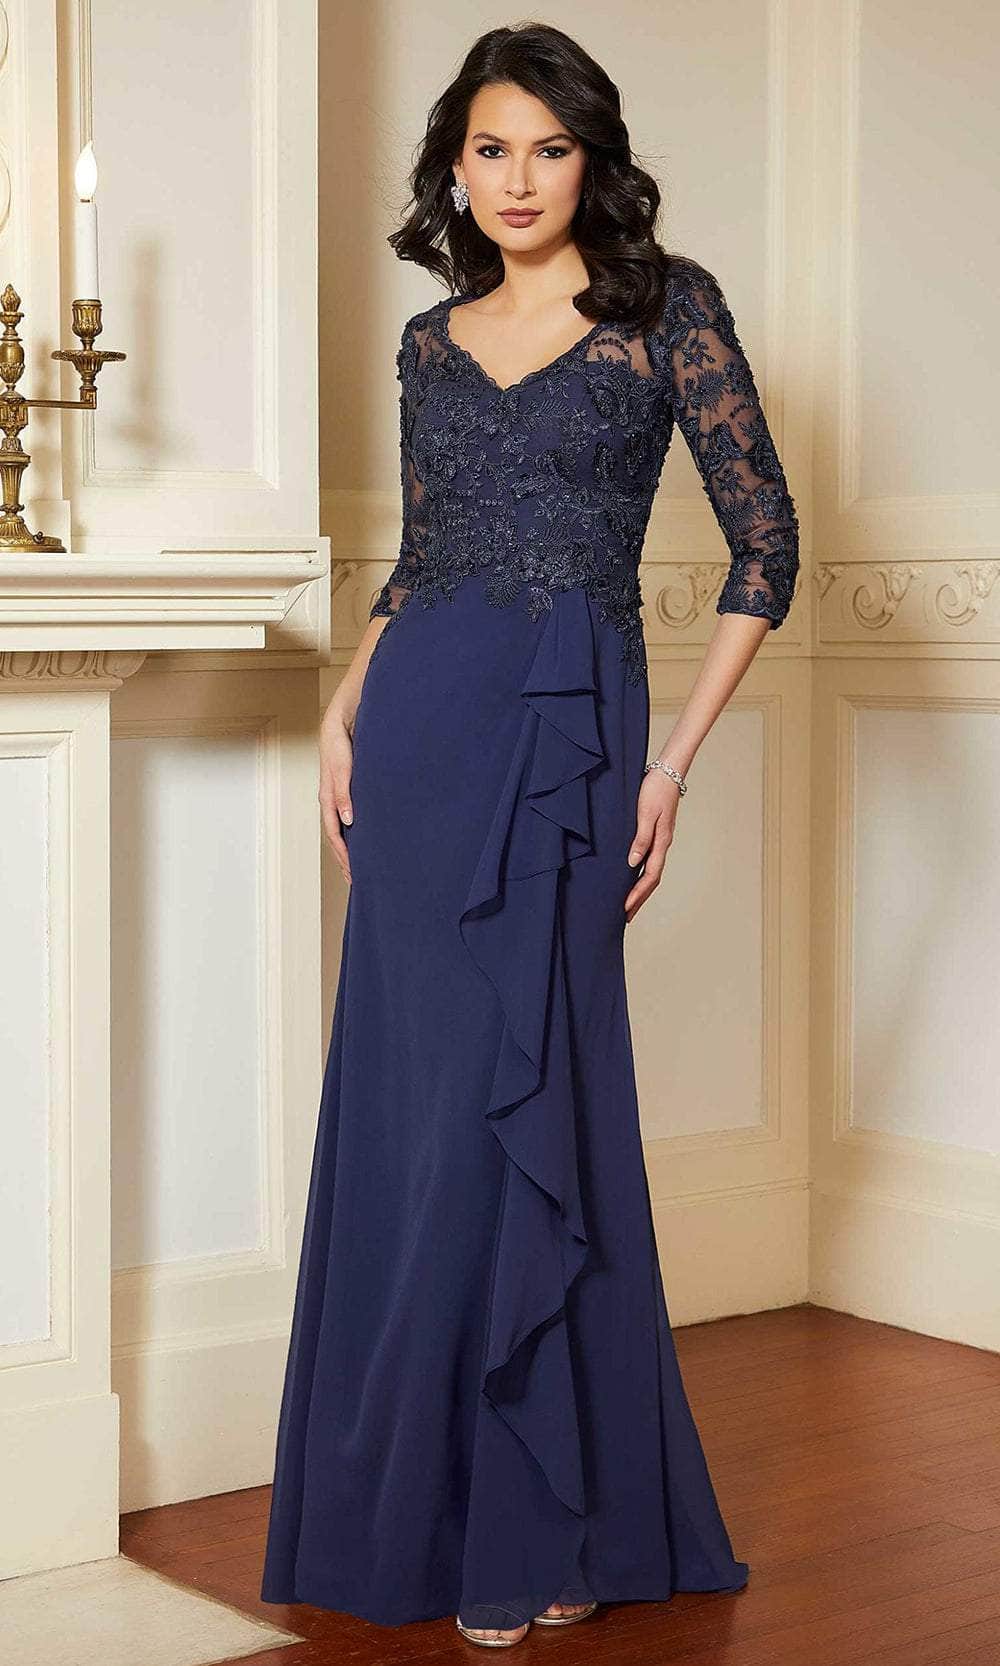 Mori Lee 72619 - Lace Ruffled Evening Gown Evening Dresses 00 / Navy